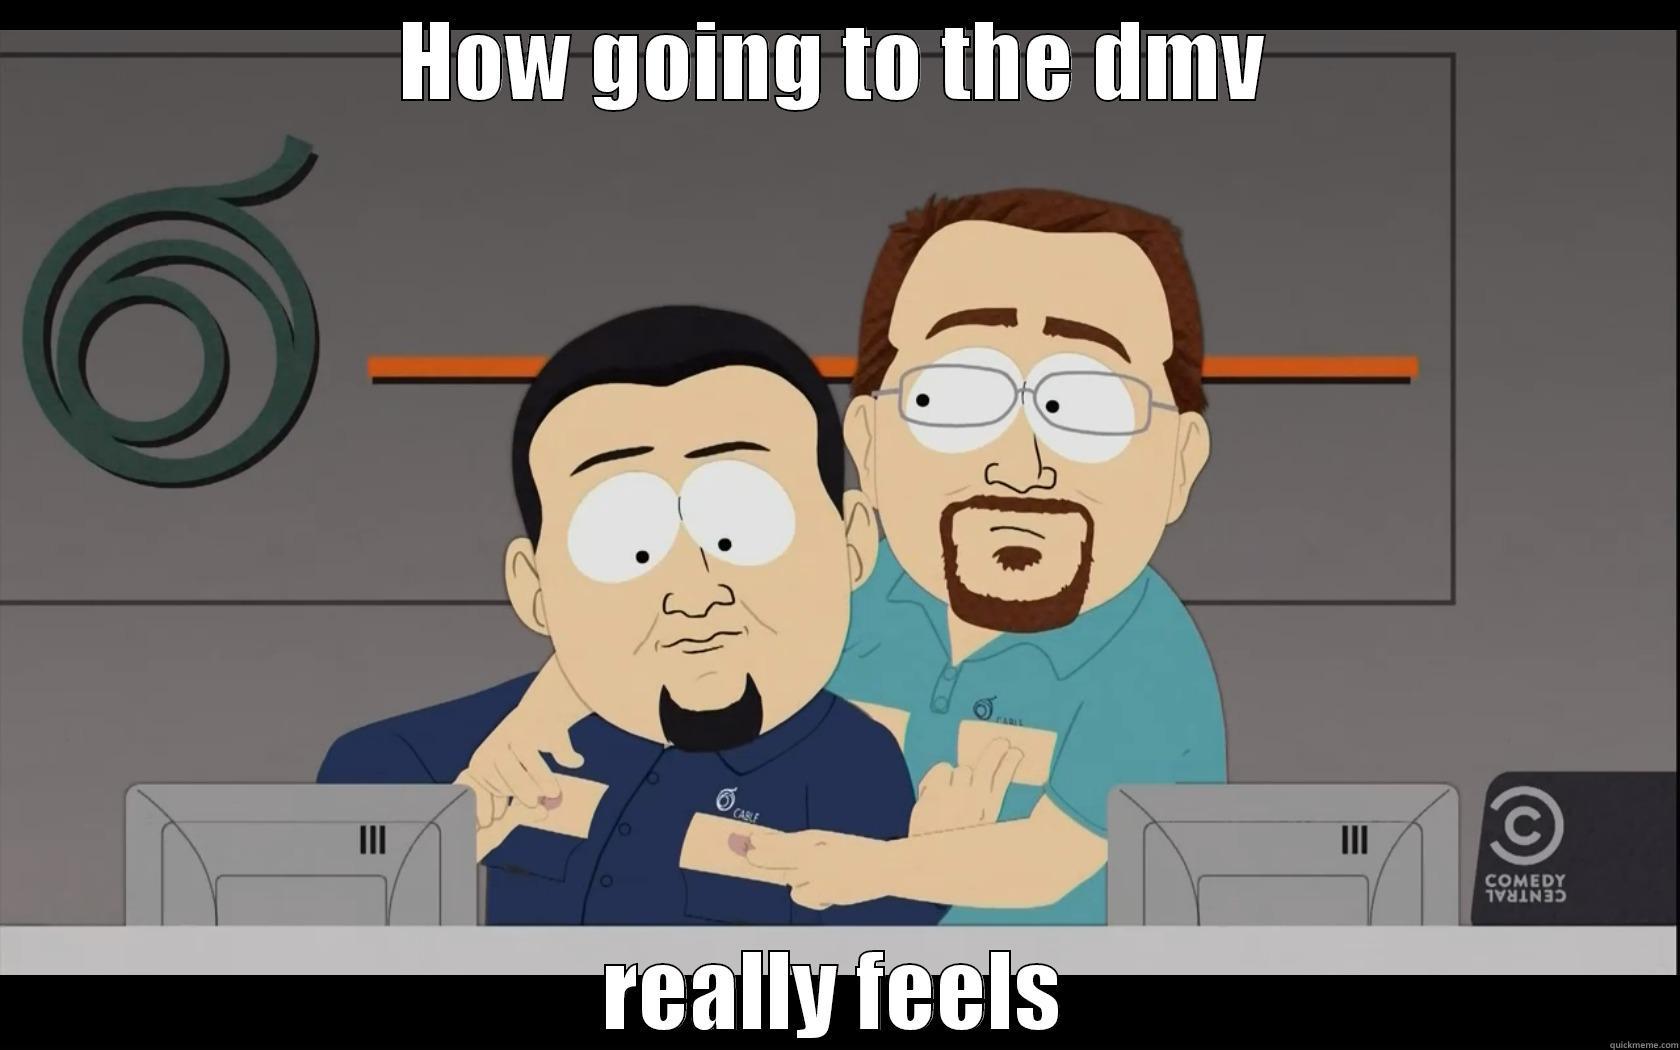 Going to the dmv - HOW GOING TO THE DMV REALLY FEELS Misc